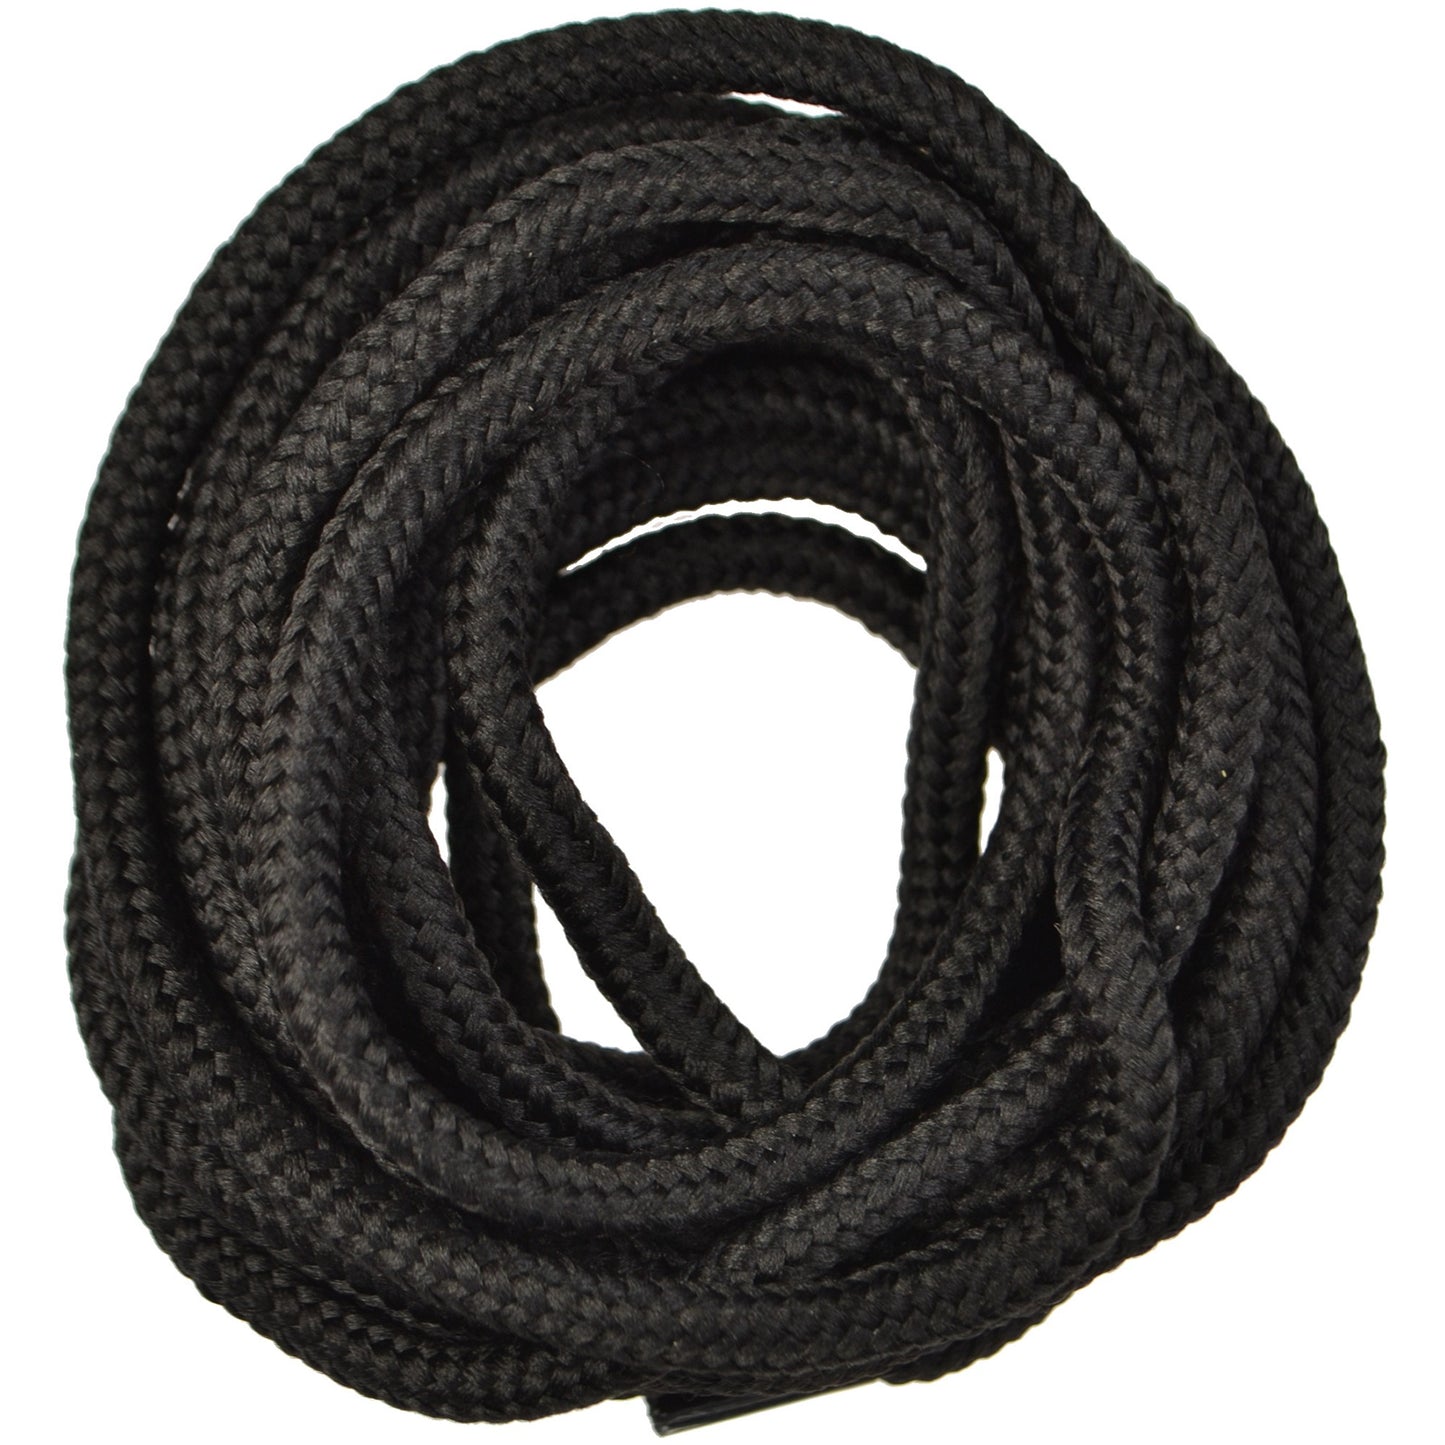 150cm Worksite Cord Work Boot Shoe Laces - Black